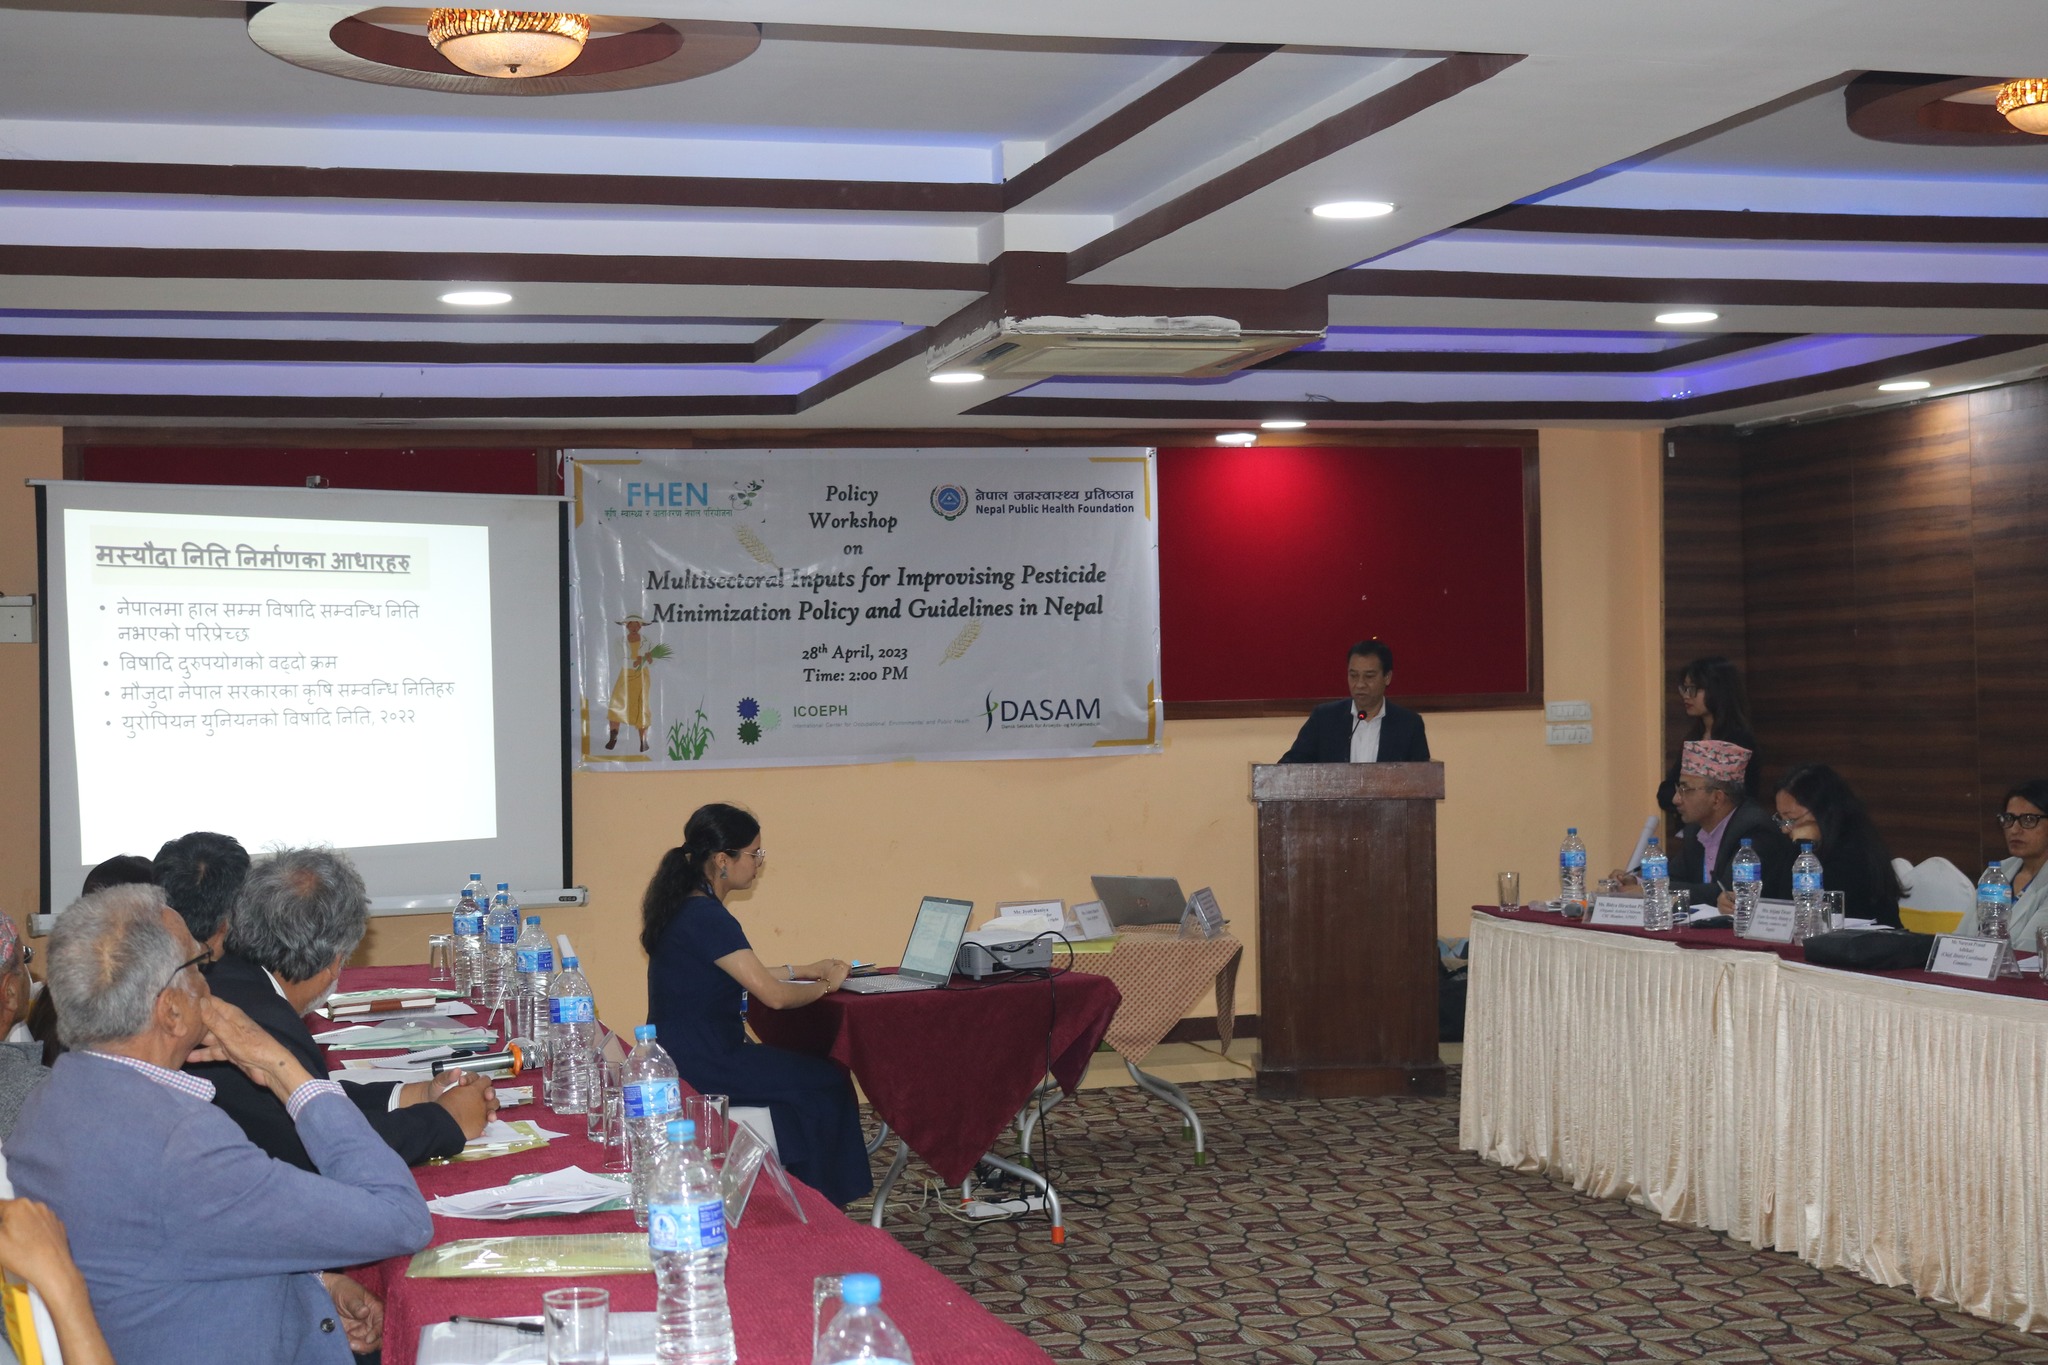 Policy Workshop Conducted on “Multisectoral Inputs for Improvising Pesticide Minimization Policy and Guidelines in Nepal”